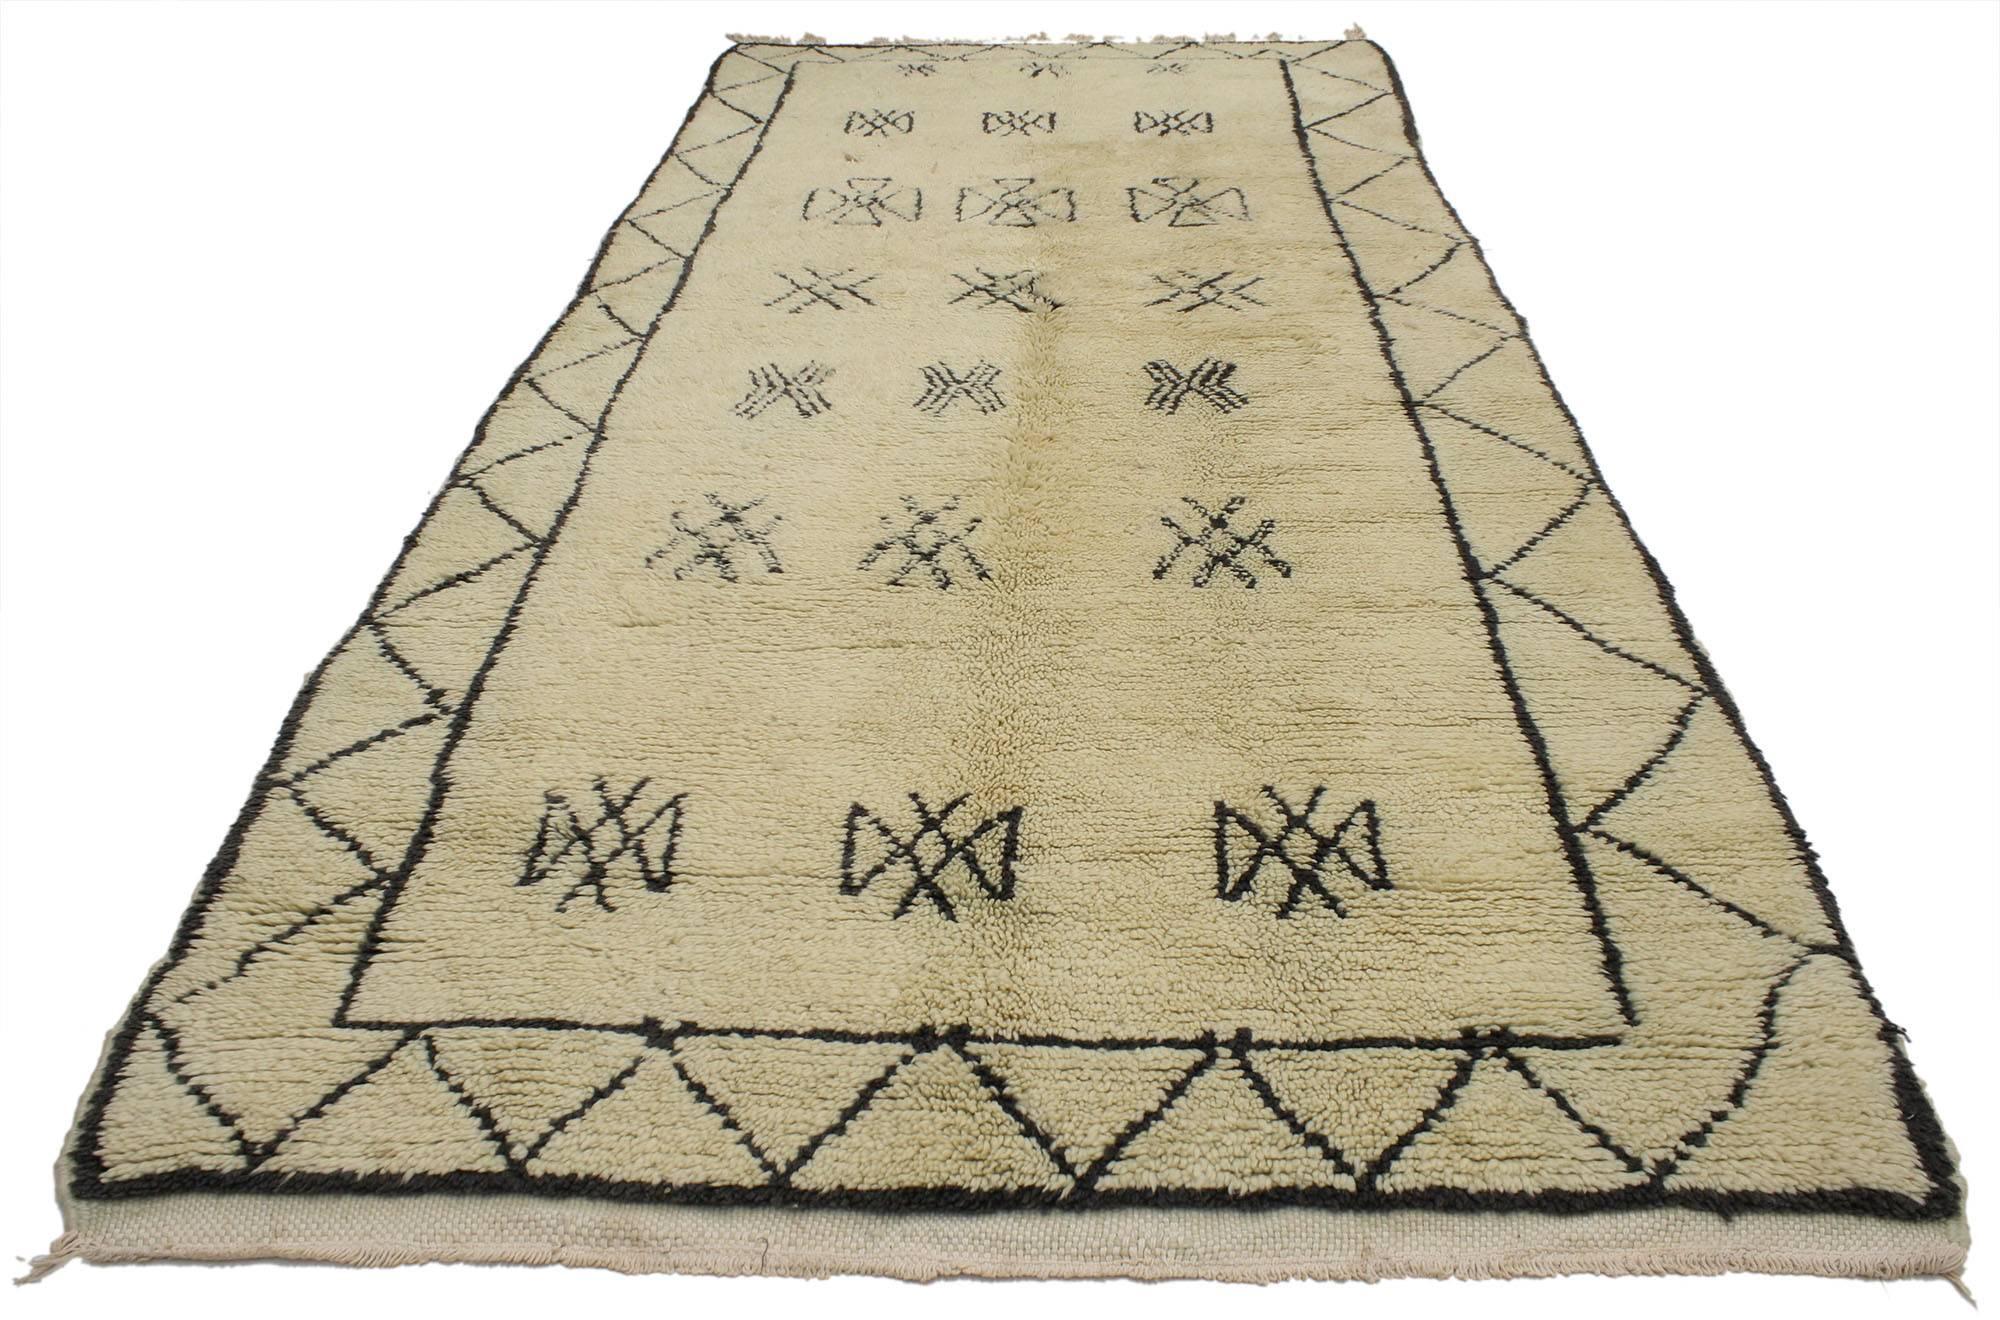 20572, vintage Berber Moroccan rug. The creamy-beige provides a beautiful backdrop for the black coffee colored design featured on this vintage Berber Moroccan rug. This Moroccan rug is rich in Ancient Berber culture, as the design displays a host